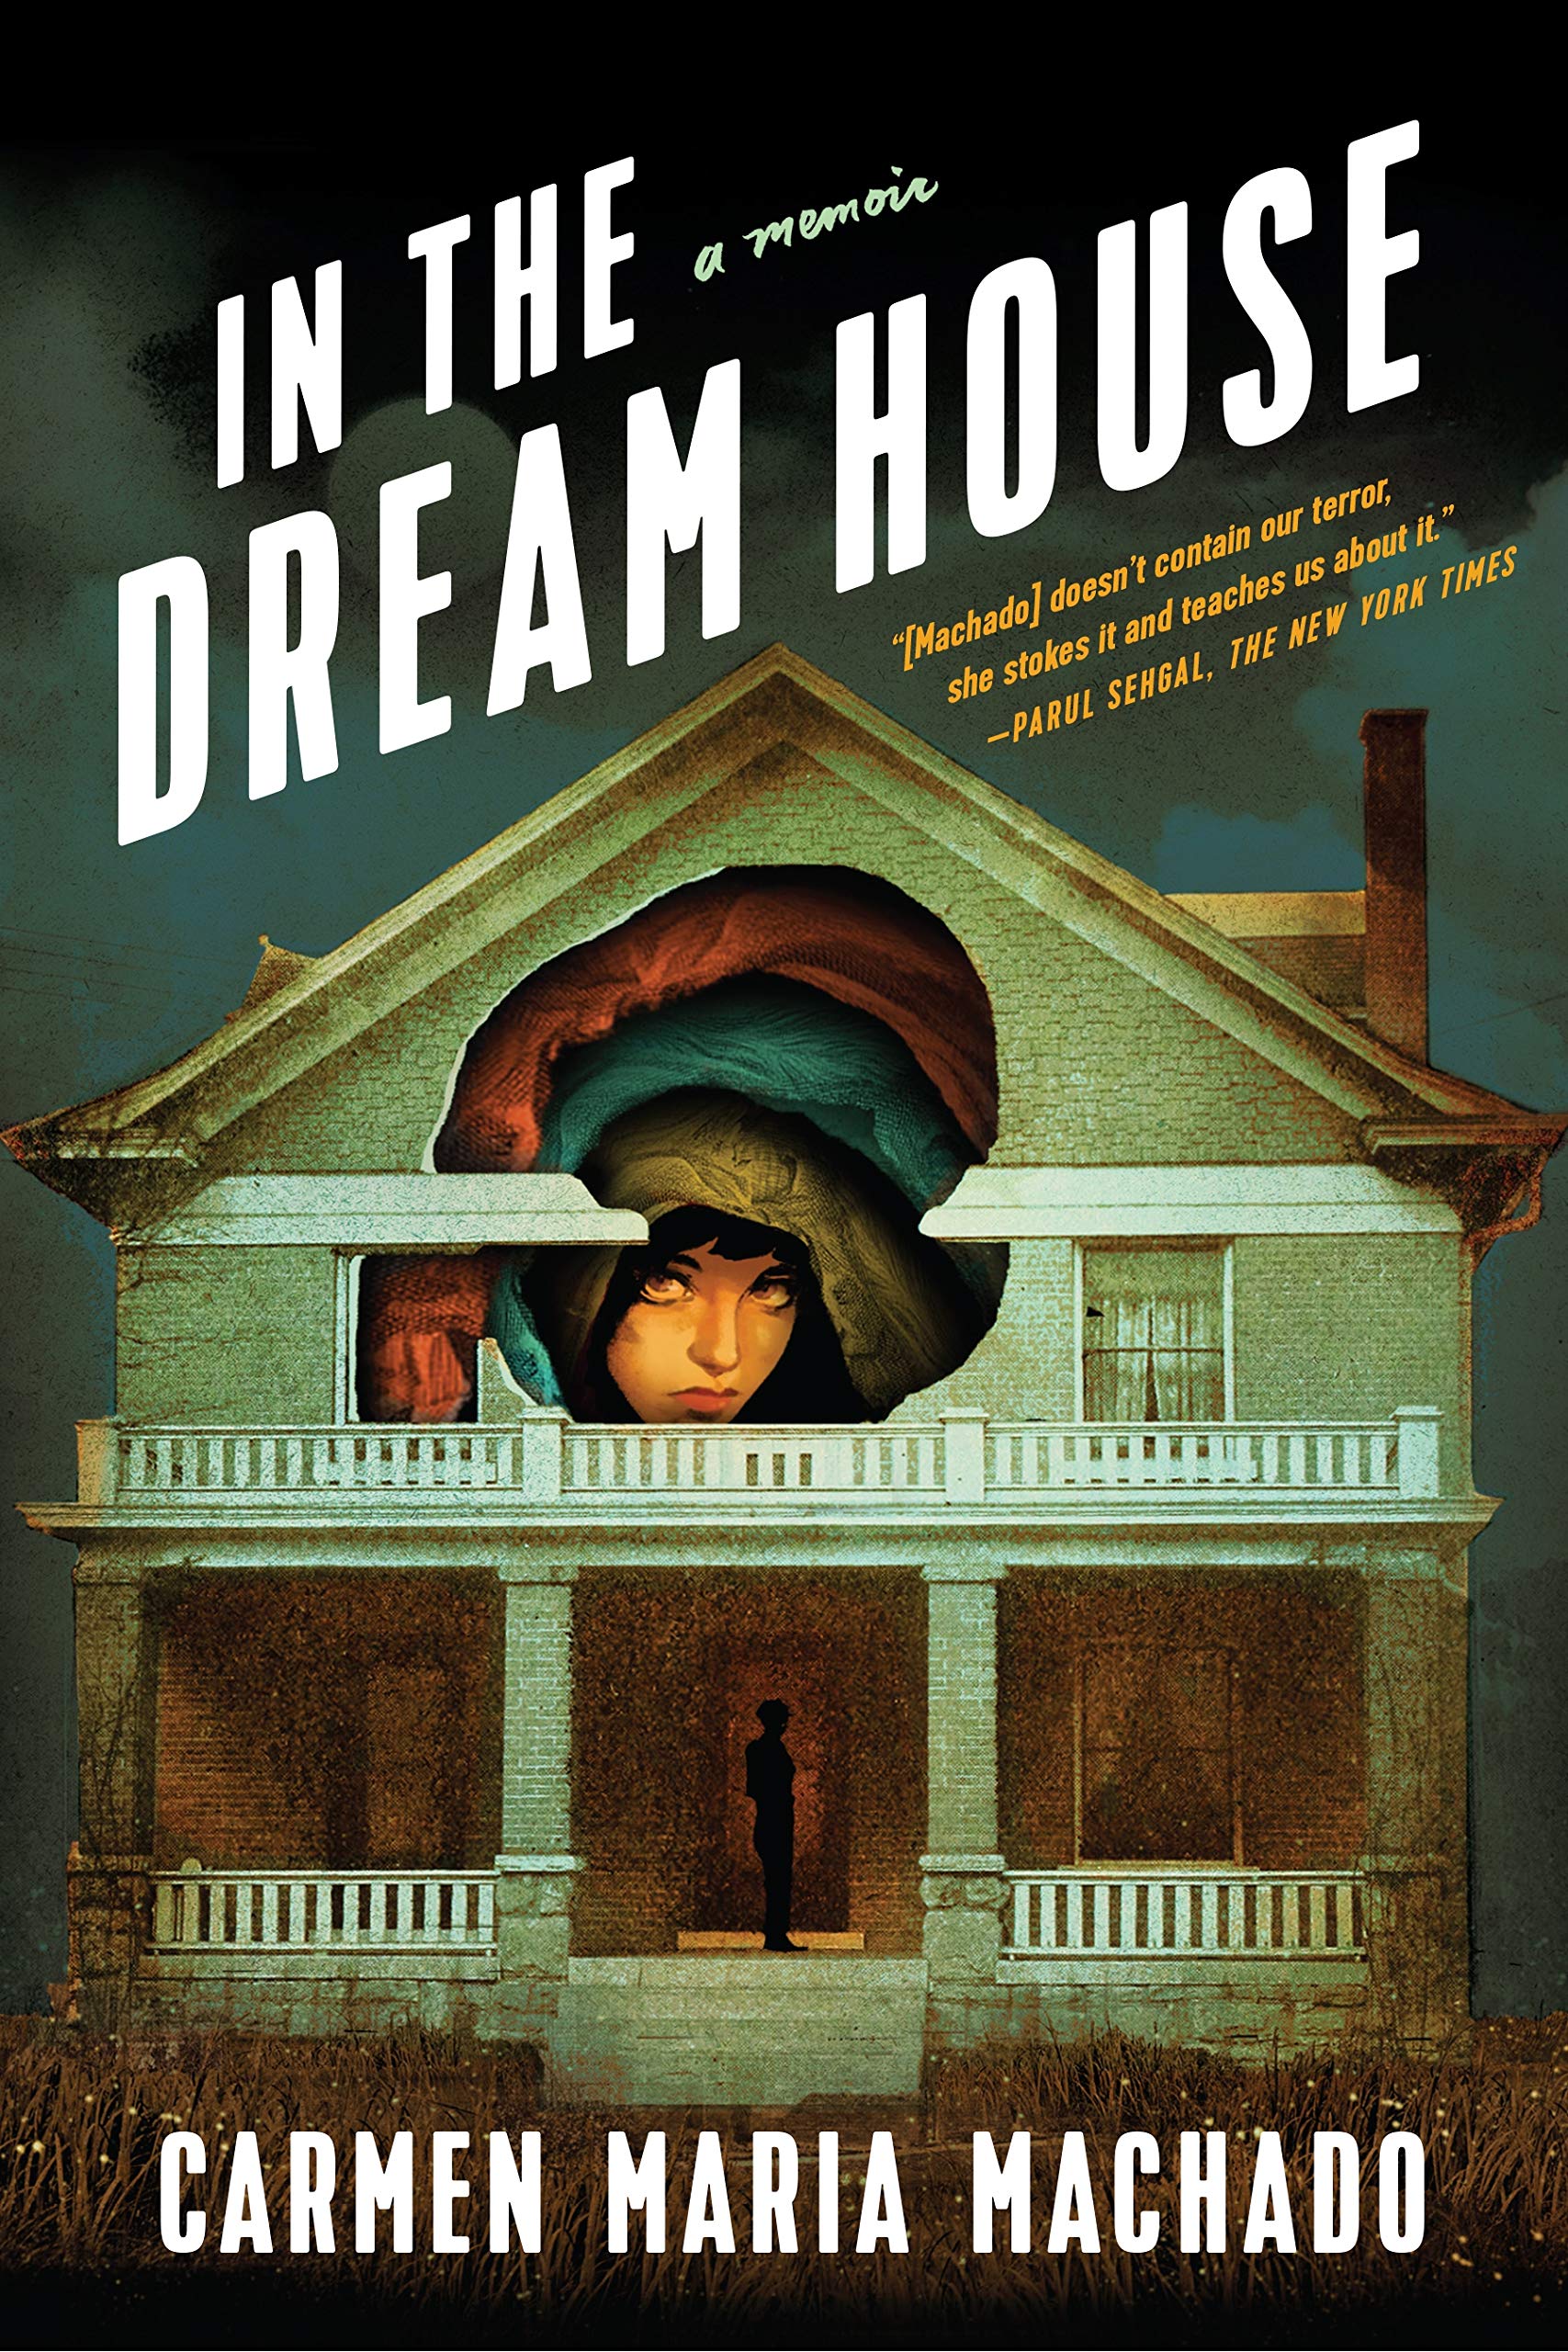 The cover of In the Dream House